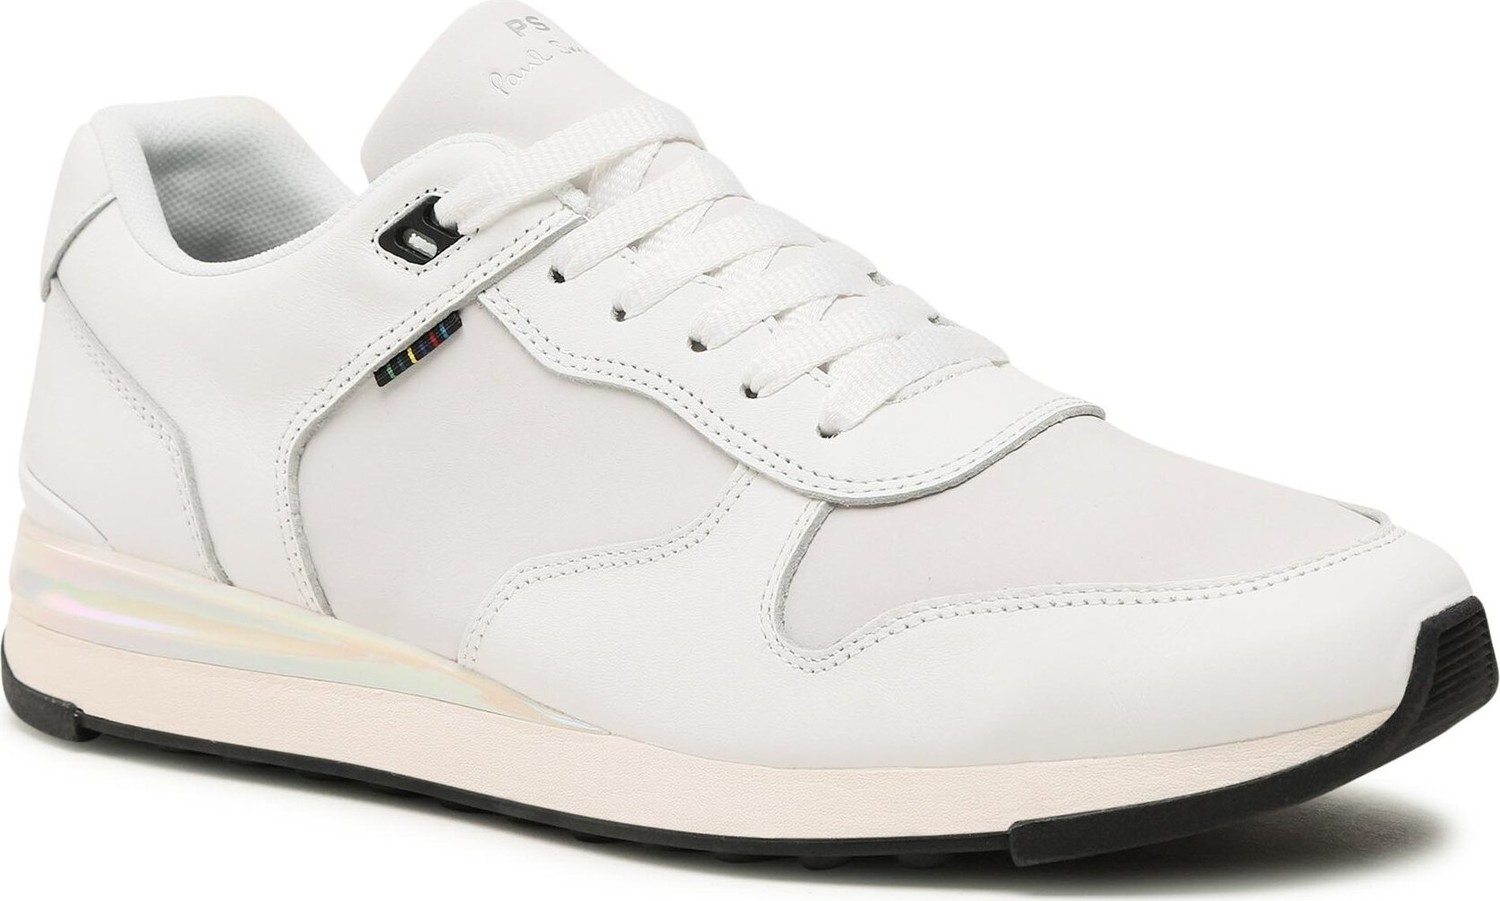 Sneakersy Paul Smith Ware M2S-WAR18-KCAS White 01